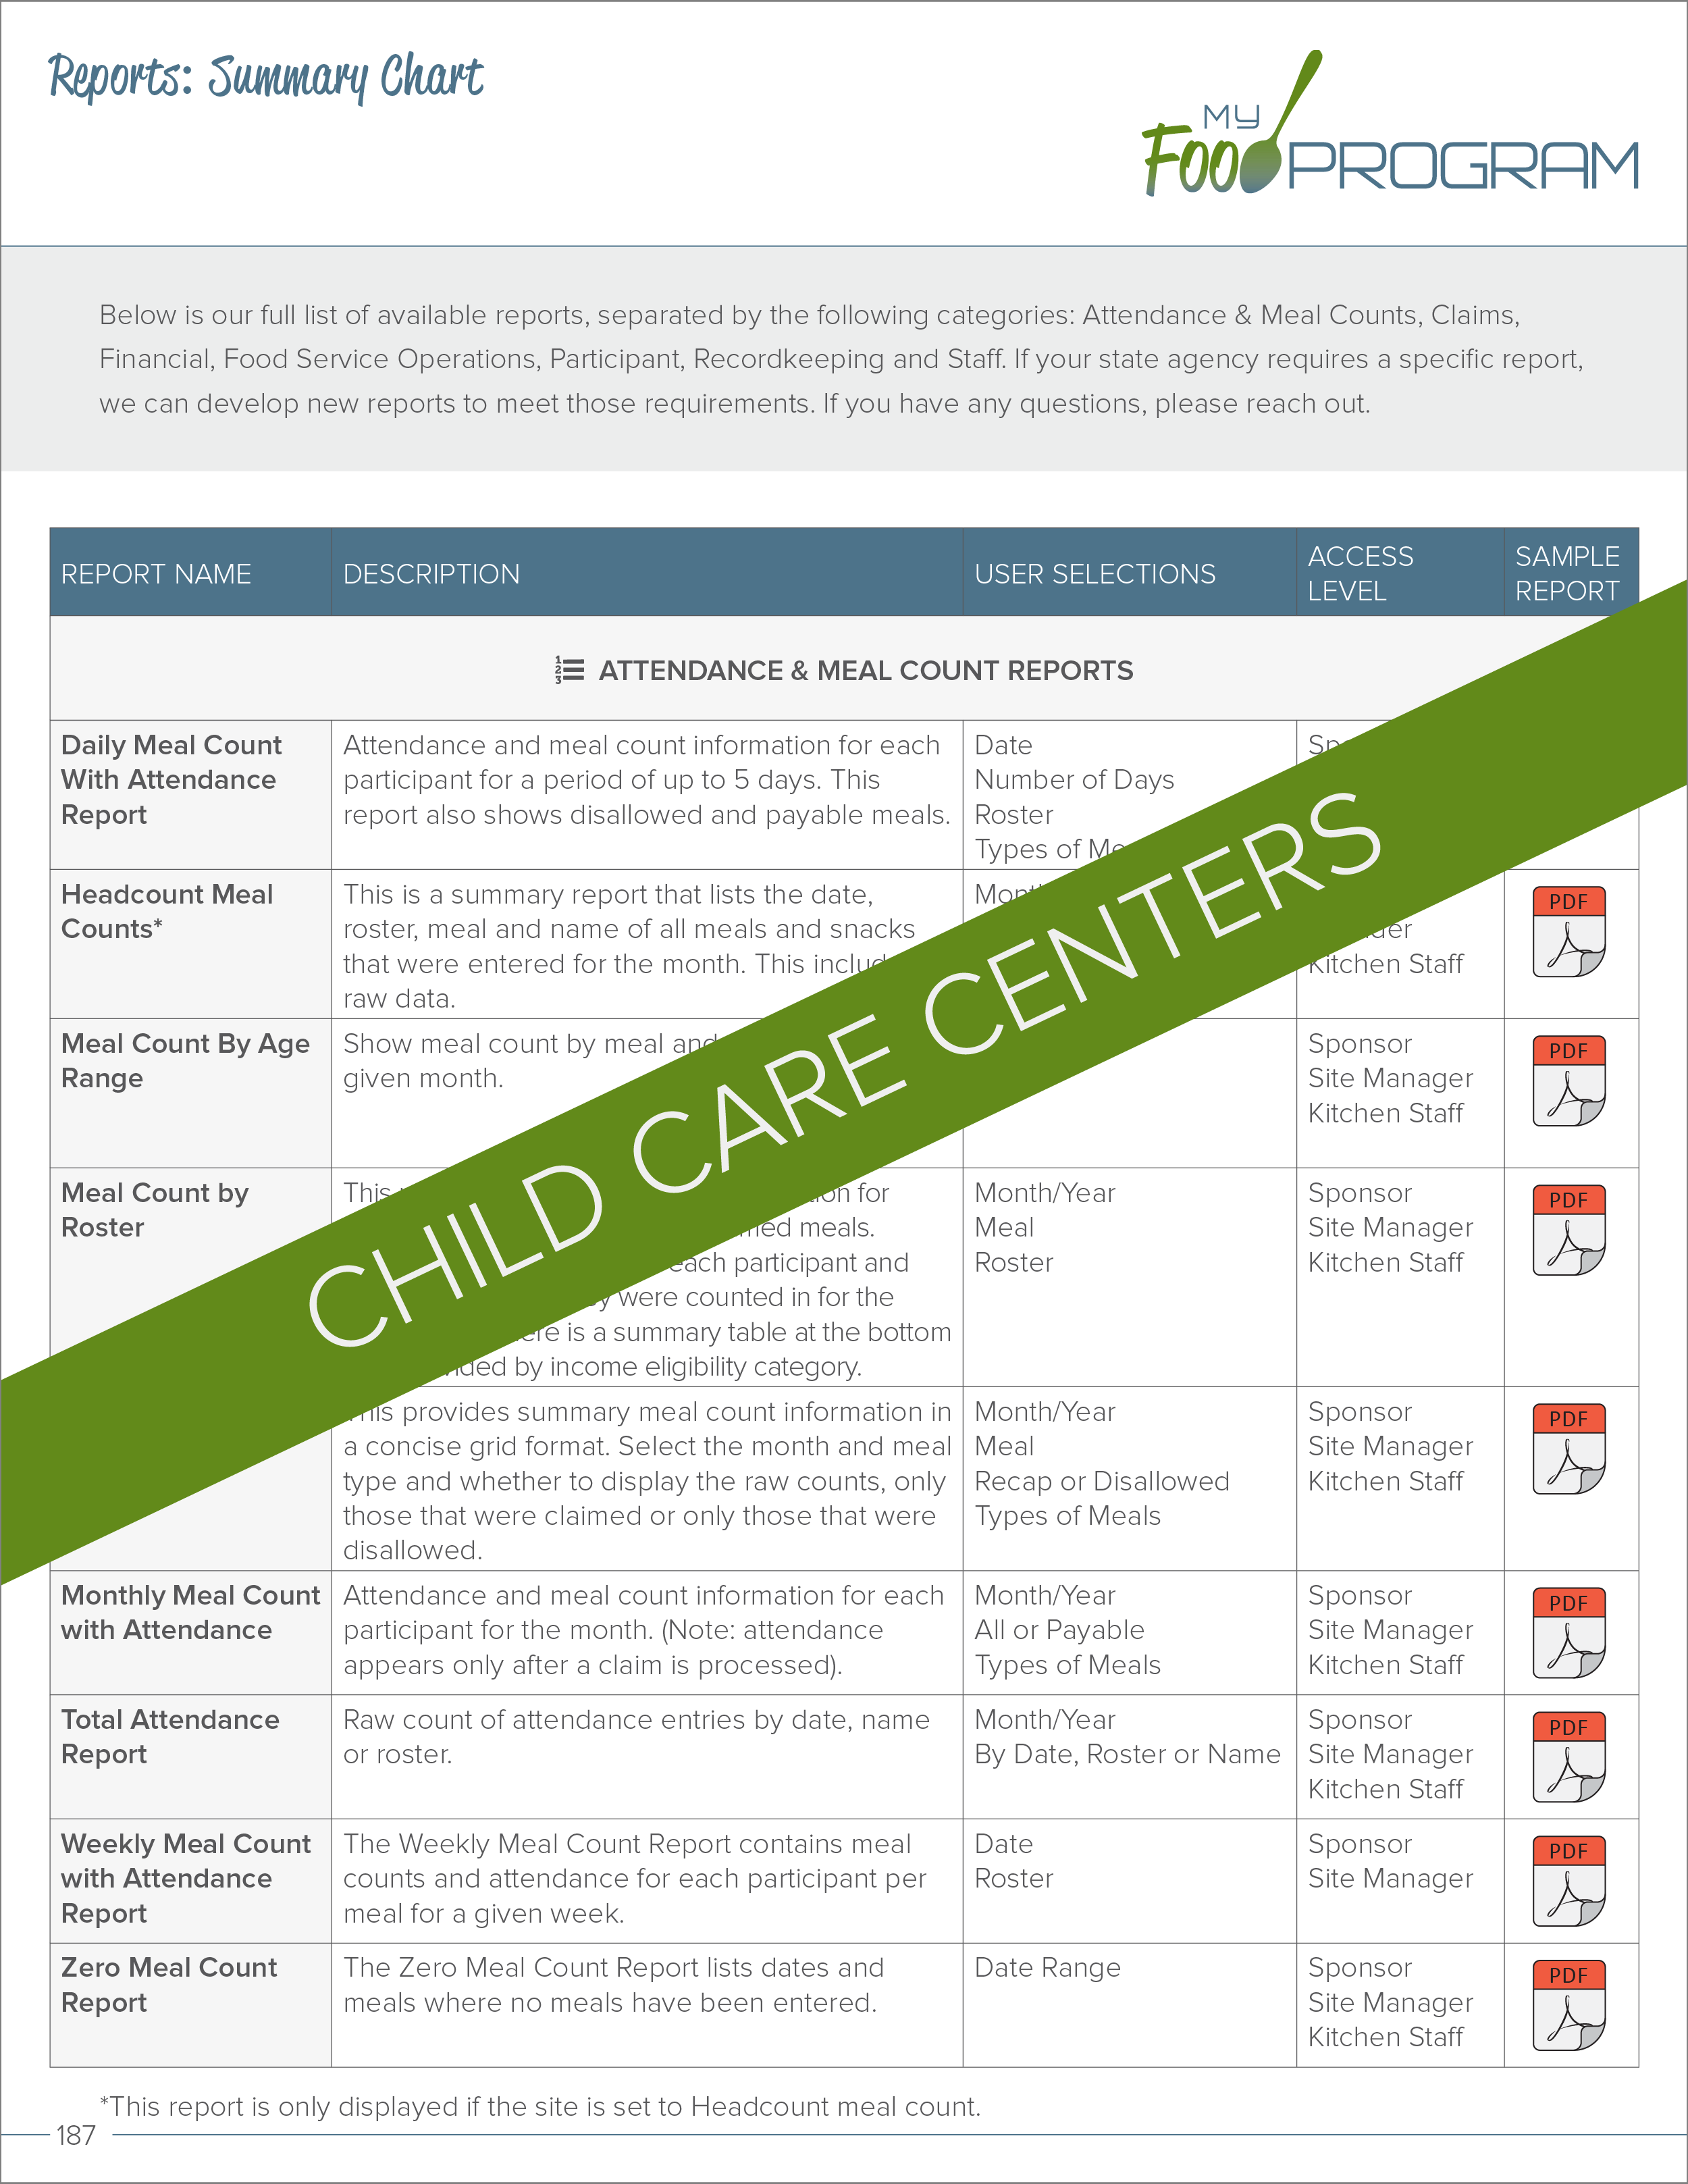 Child Care Centers Reports Summary Chart